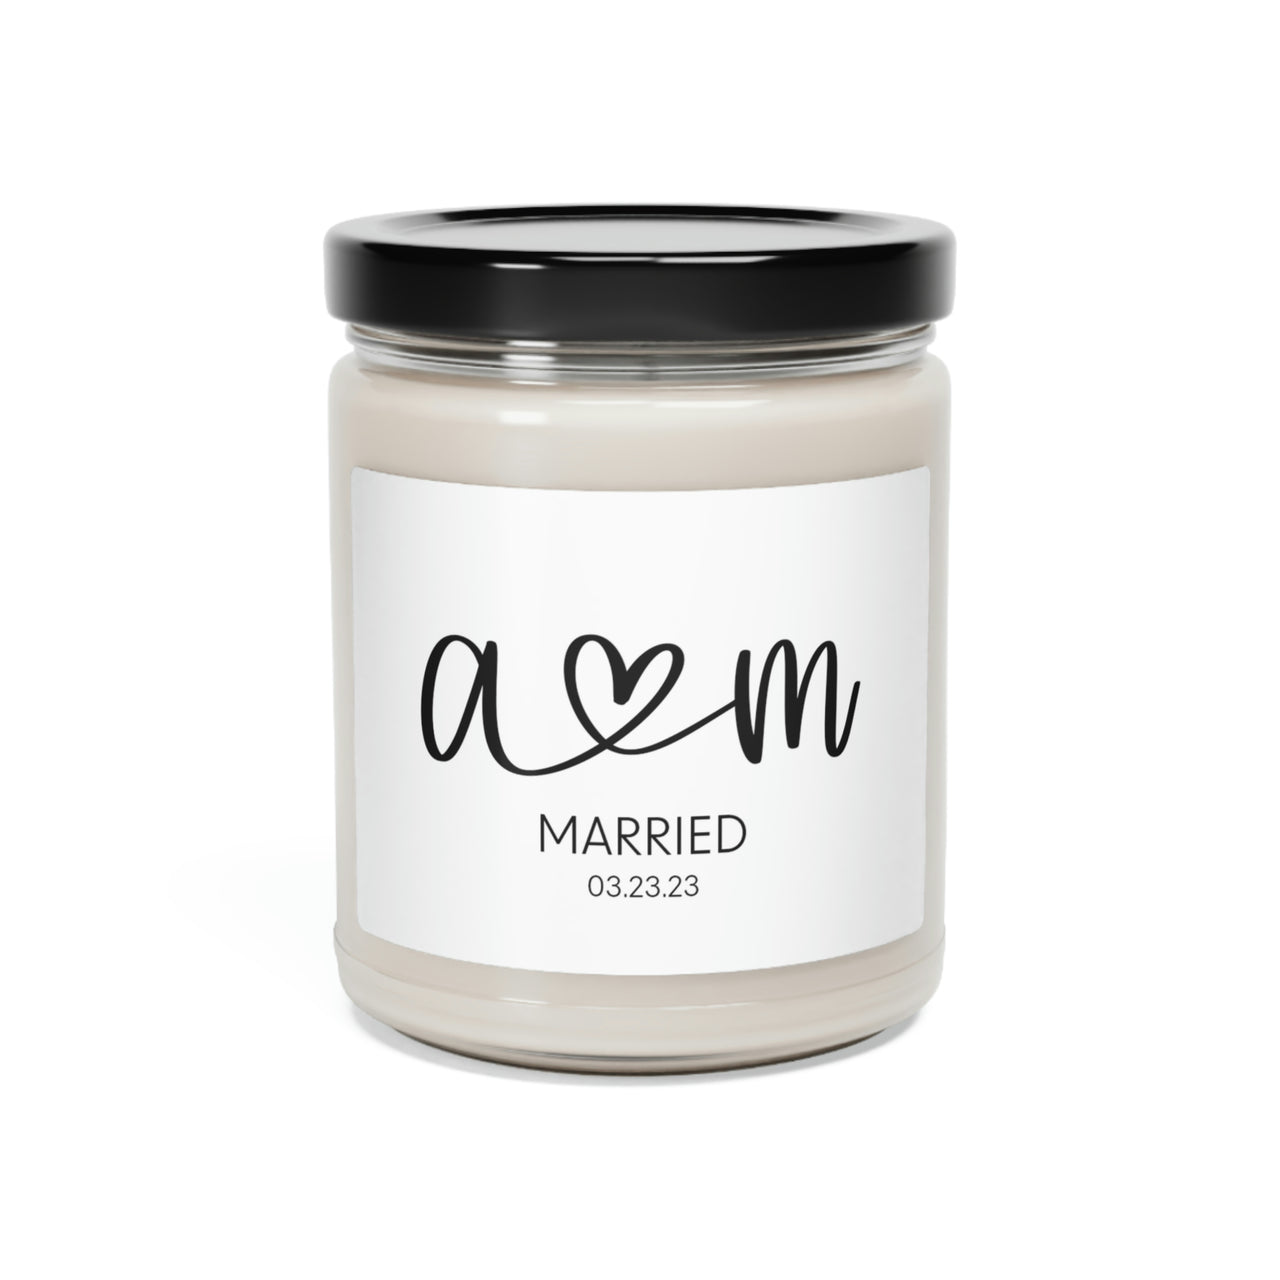 Personalized Candle with Custom Initials - Married Scented Soy Candle